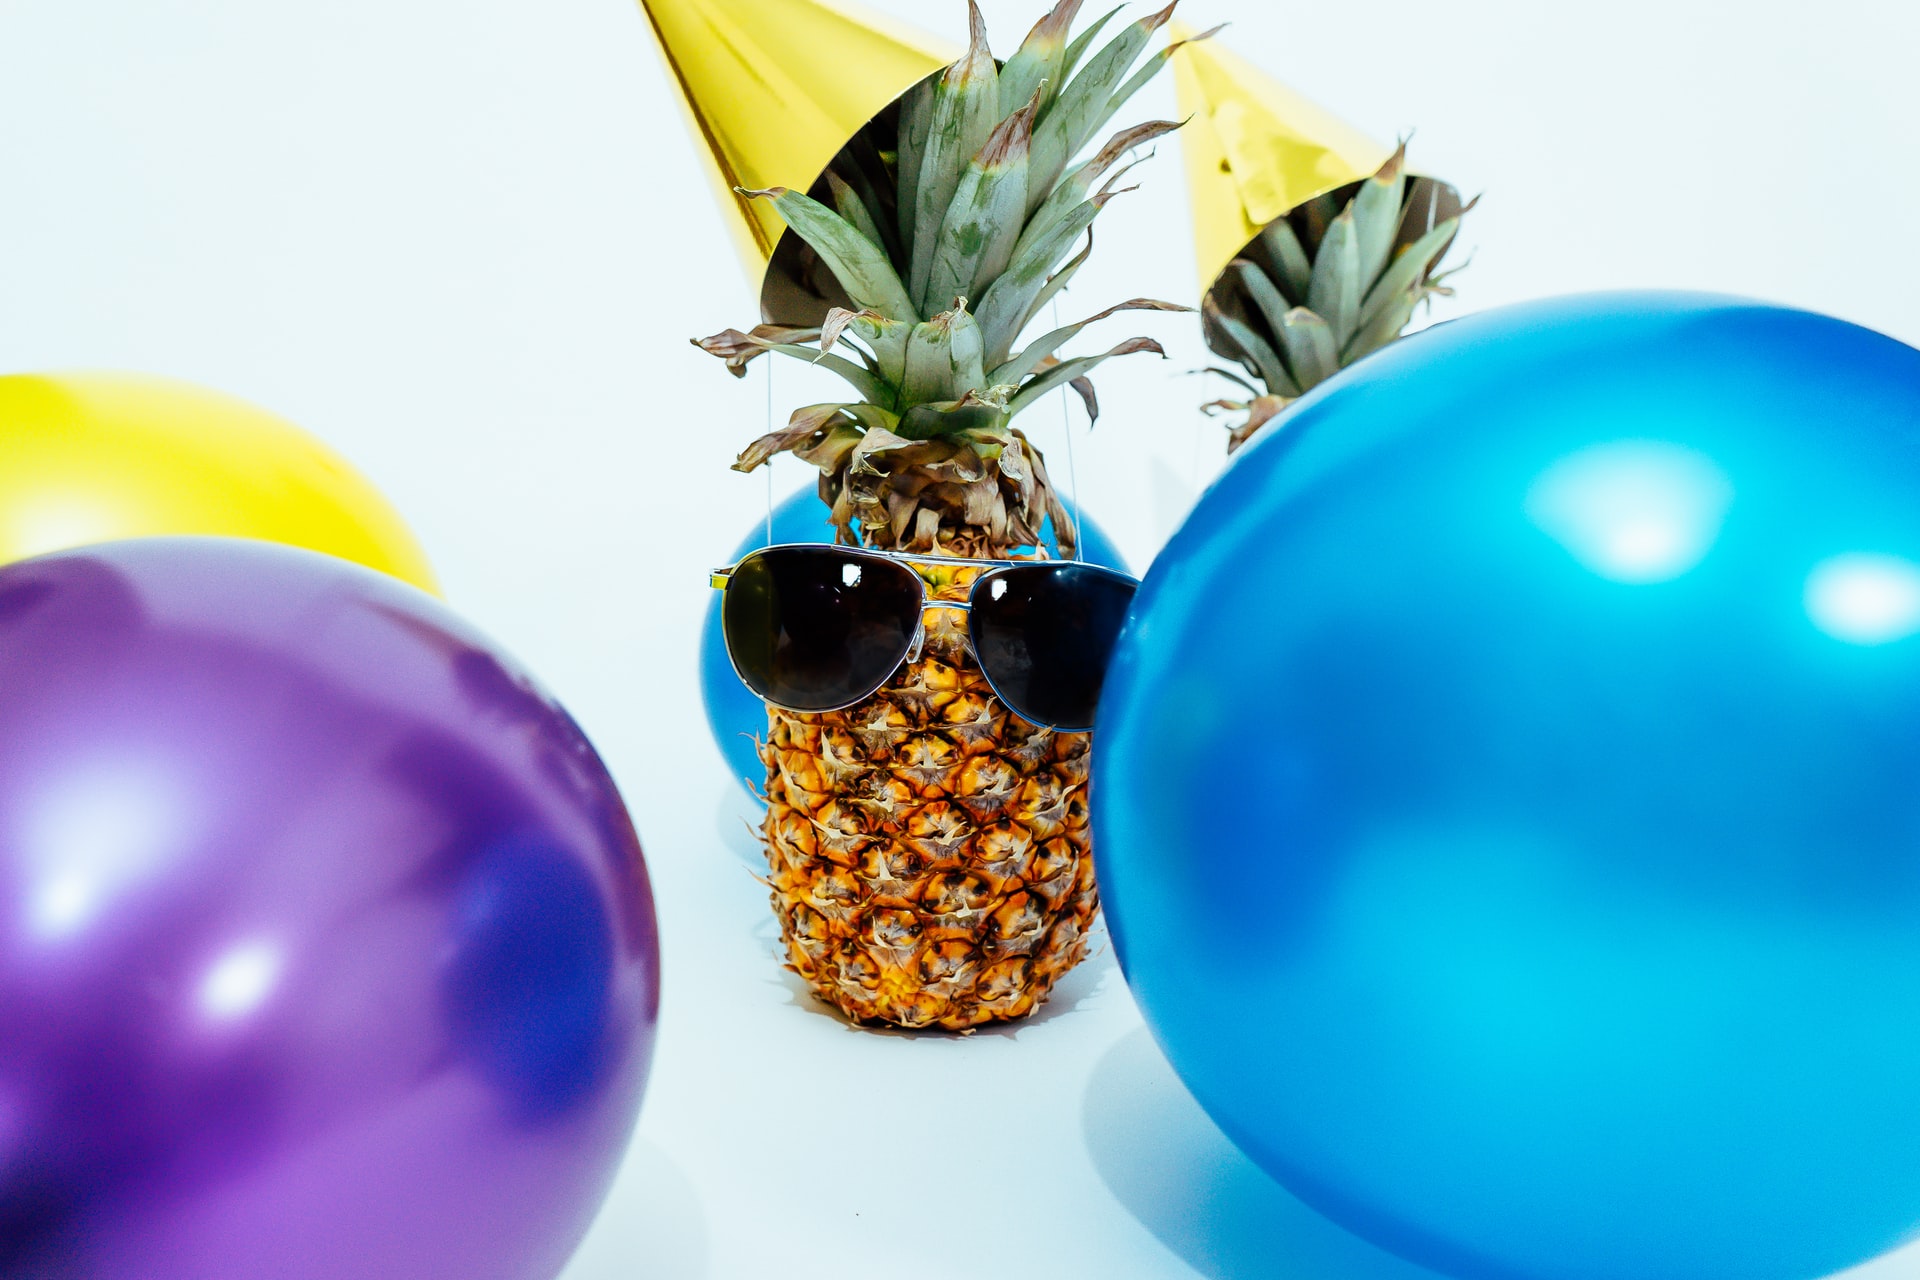 A pineapple wearing black glasses and surrounded by balloons to symbolize parties